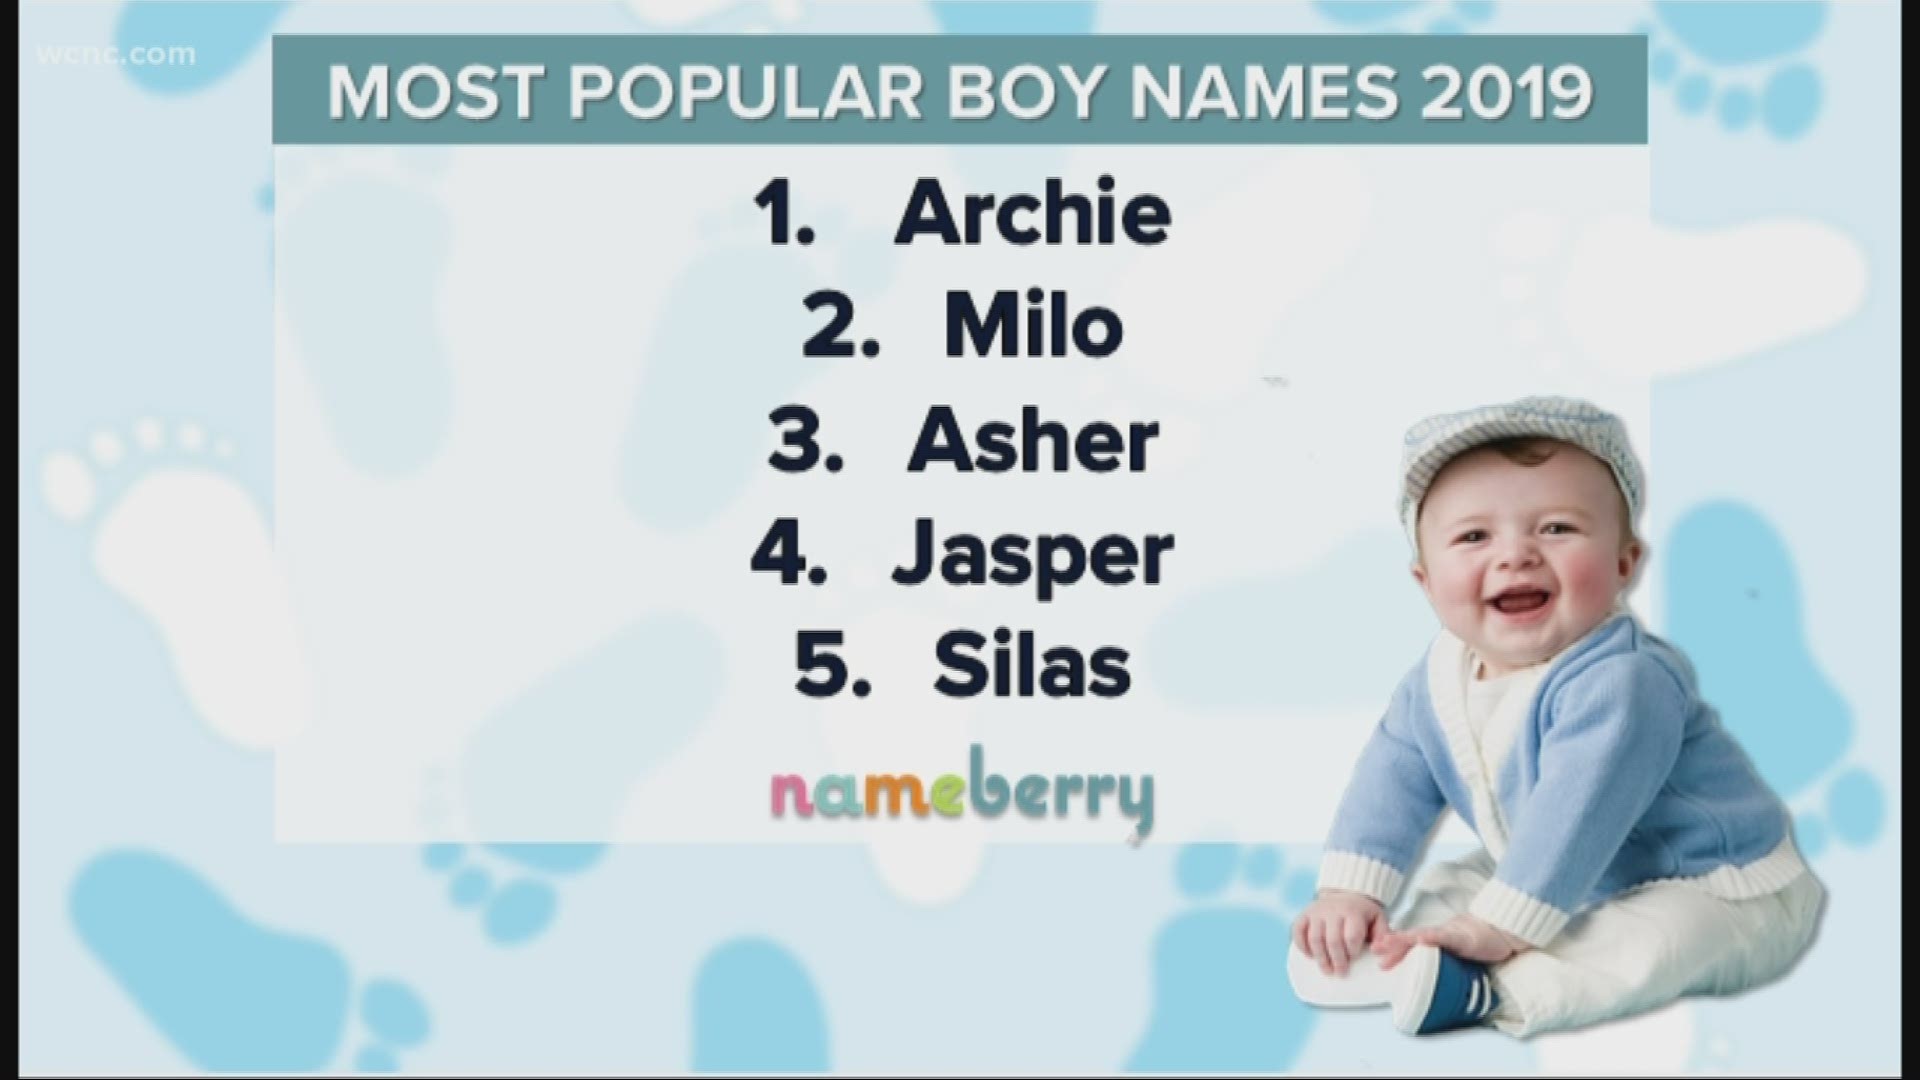 Royal baby Archie is only a couple months old but he's already influencing parents around the world. According to a new report, Archie is the most popular baby name for boys in 2019, while Isla is tops for girls.